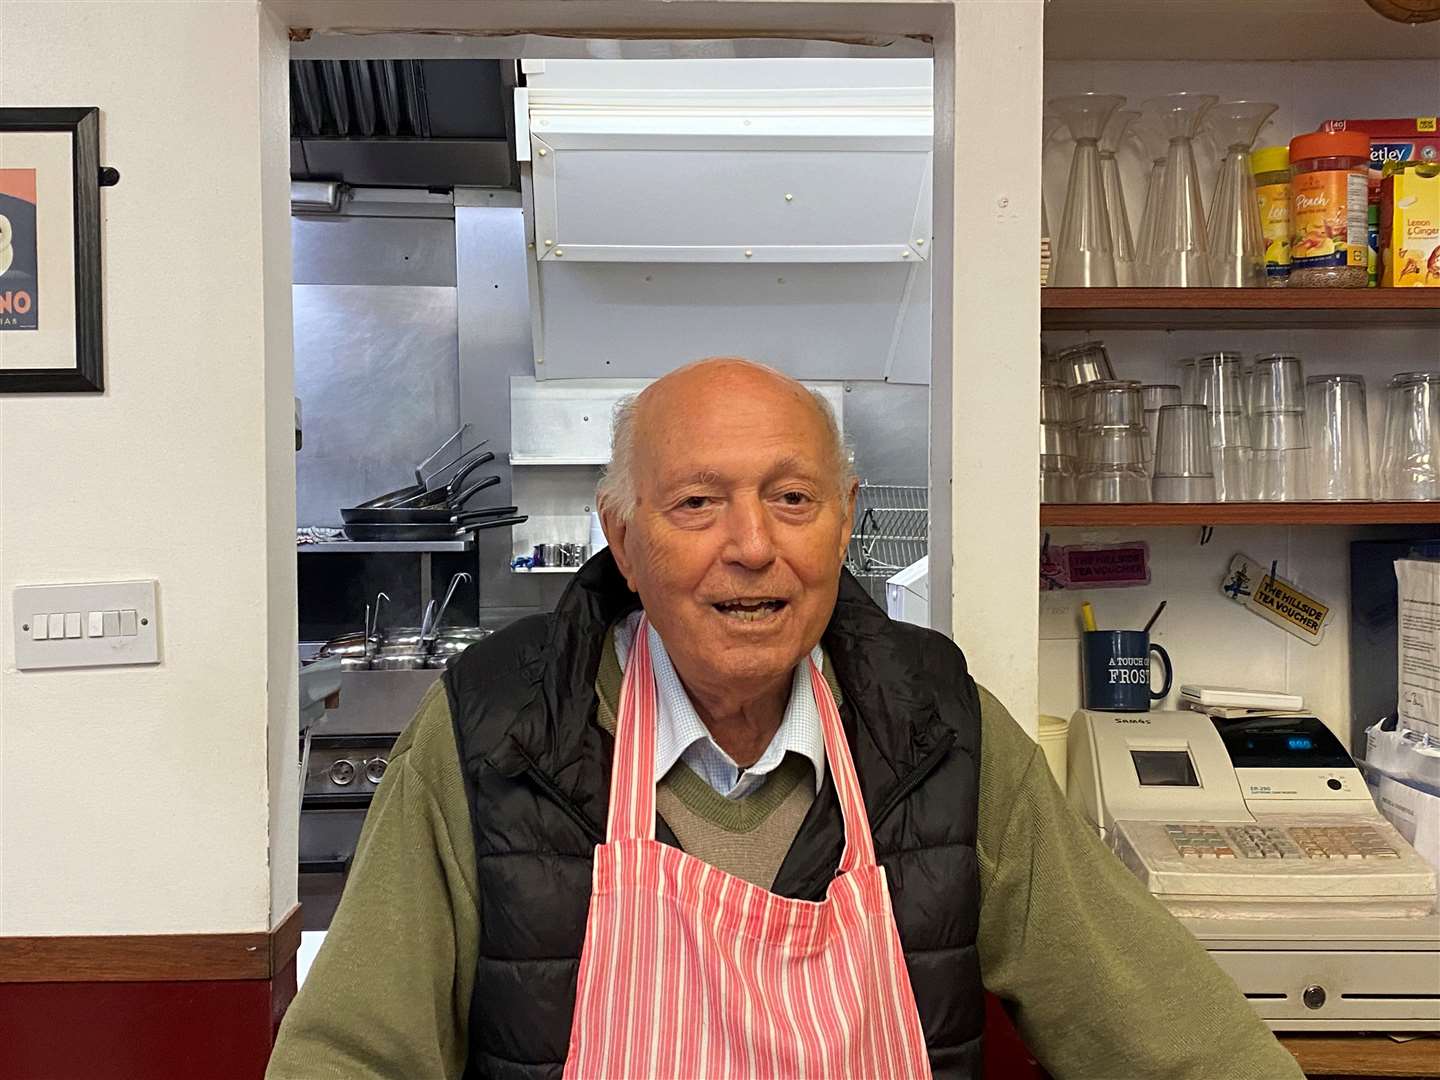 Ken Vreony has run Ken’s Hillside Cafe in Folkestone since 1975 – though he previously tried to retire in 2007